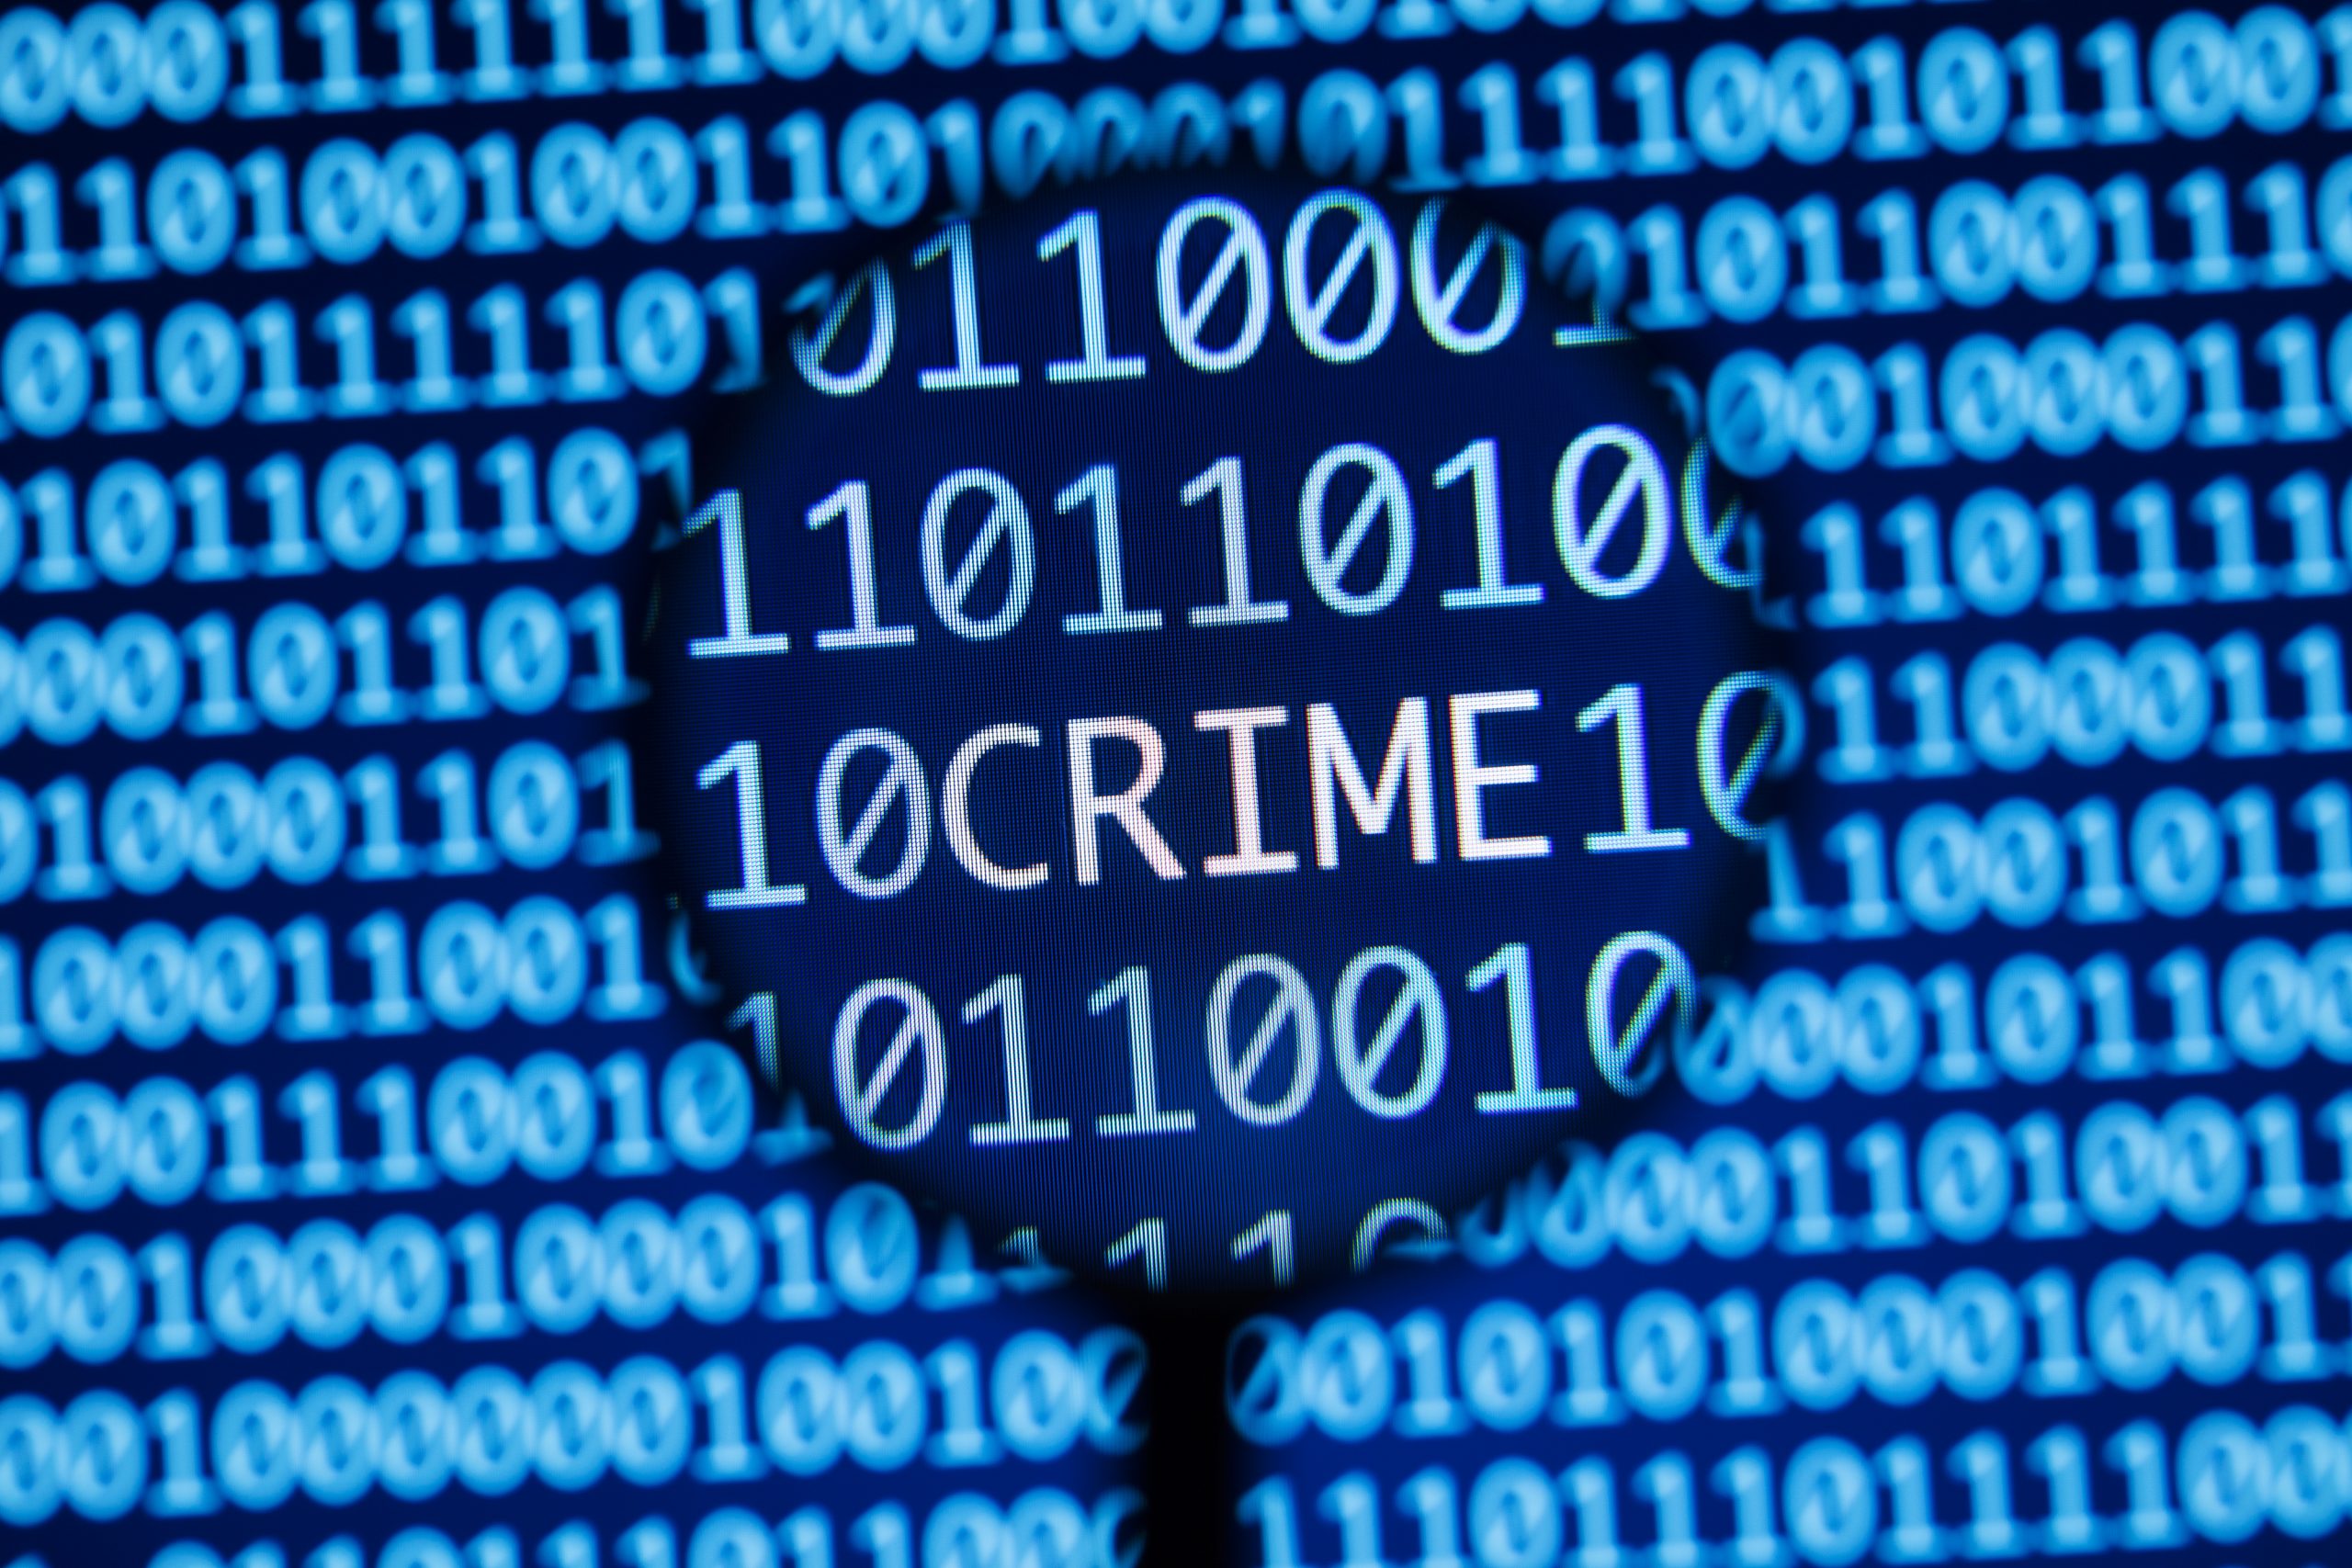 Cybercrime is an evolving form of transnational crime1